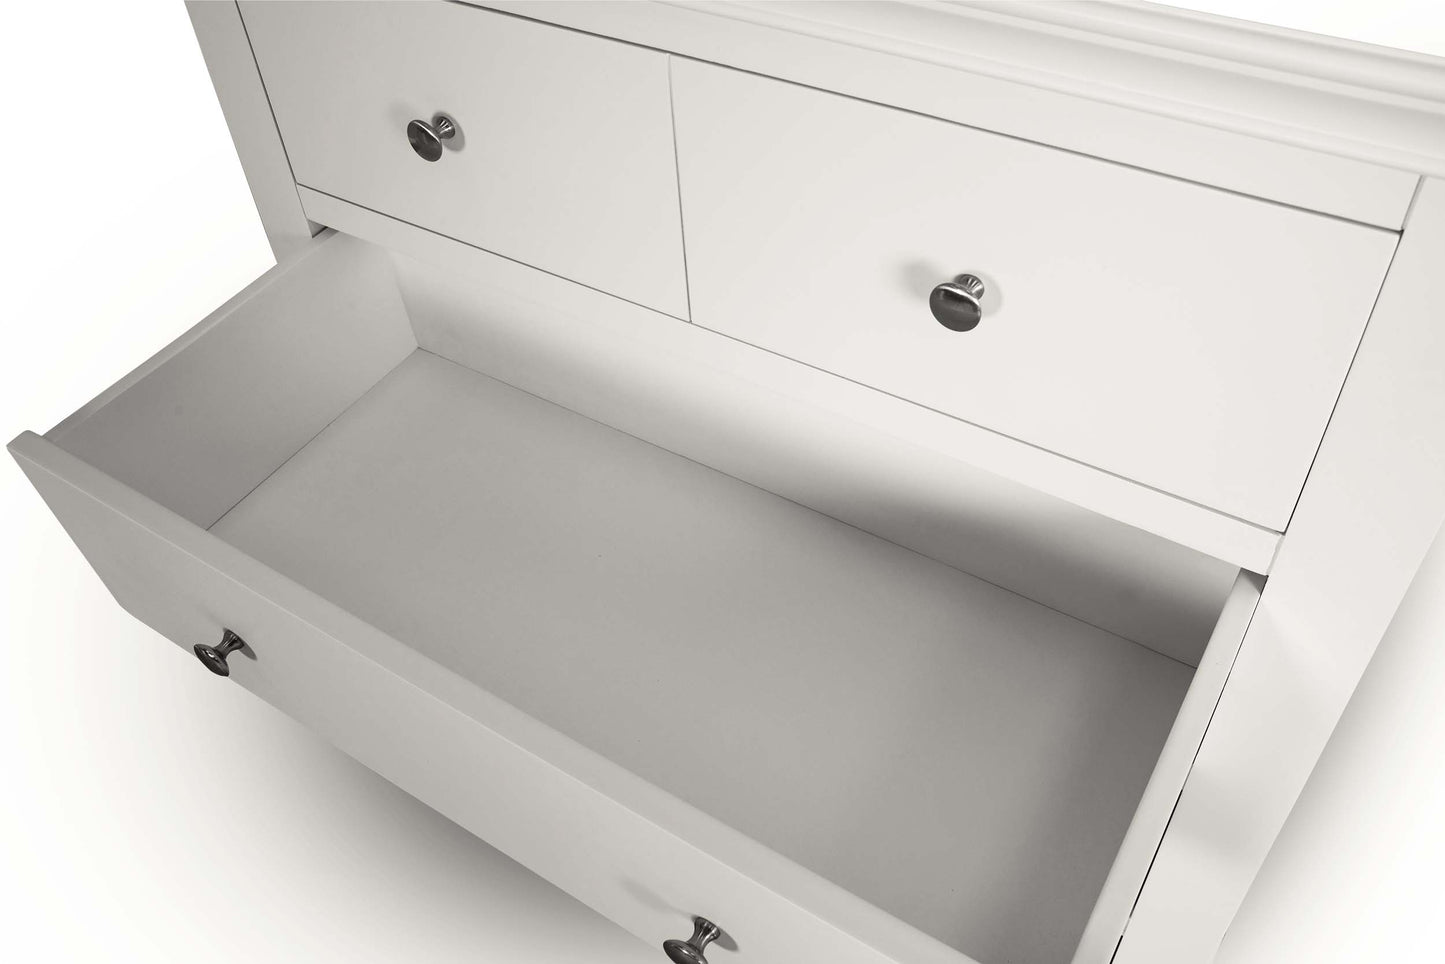 Winchester 4 Drawer Chest of Drawers - Soft White